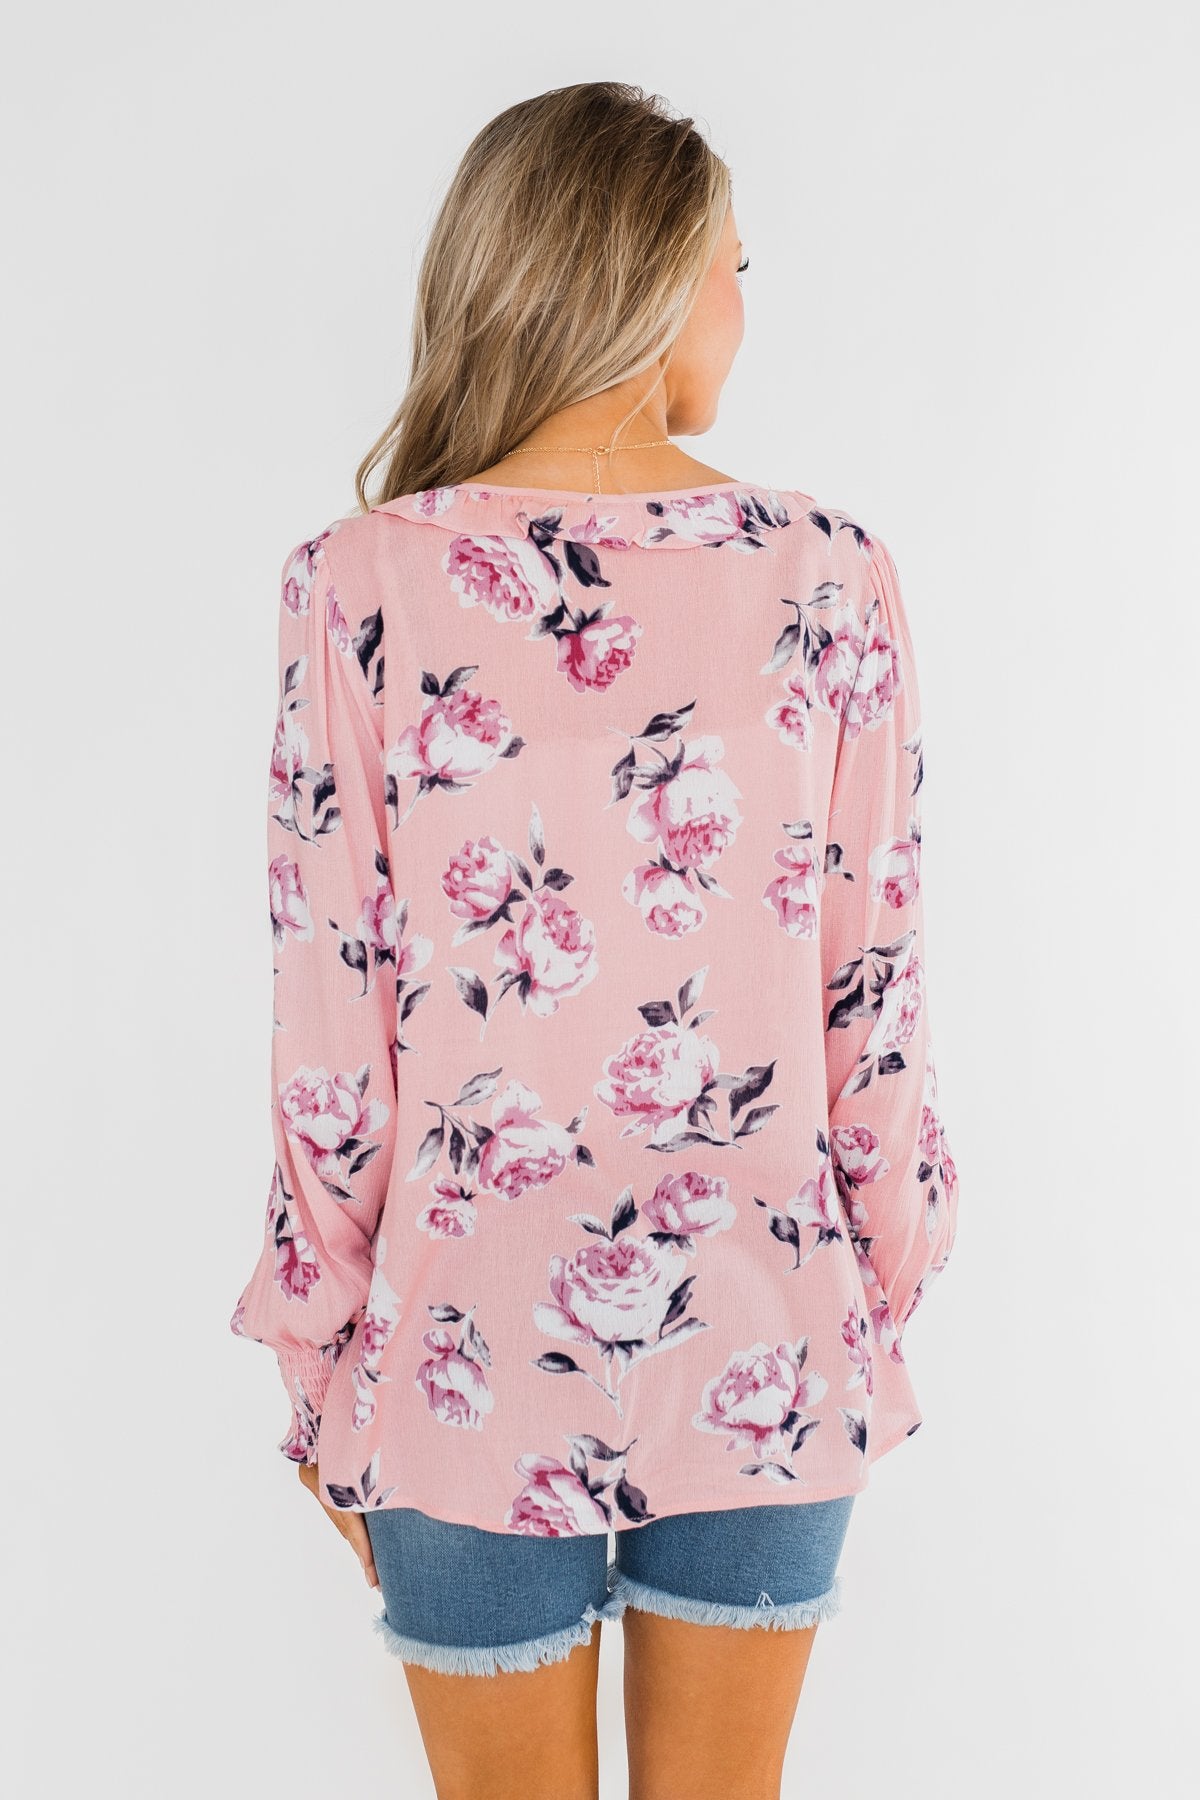 Count Your Blessings Floral Blouse- Blush